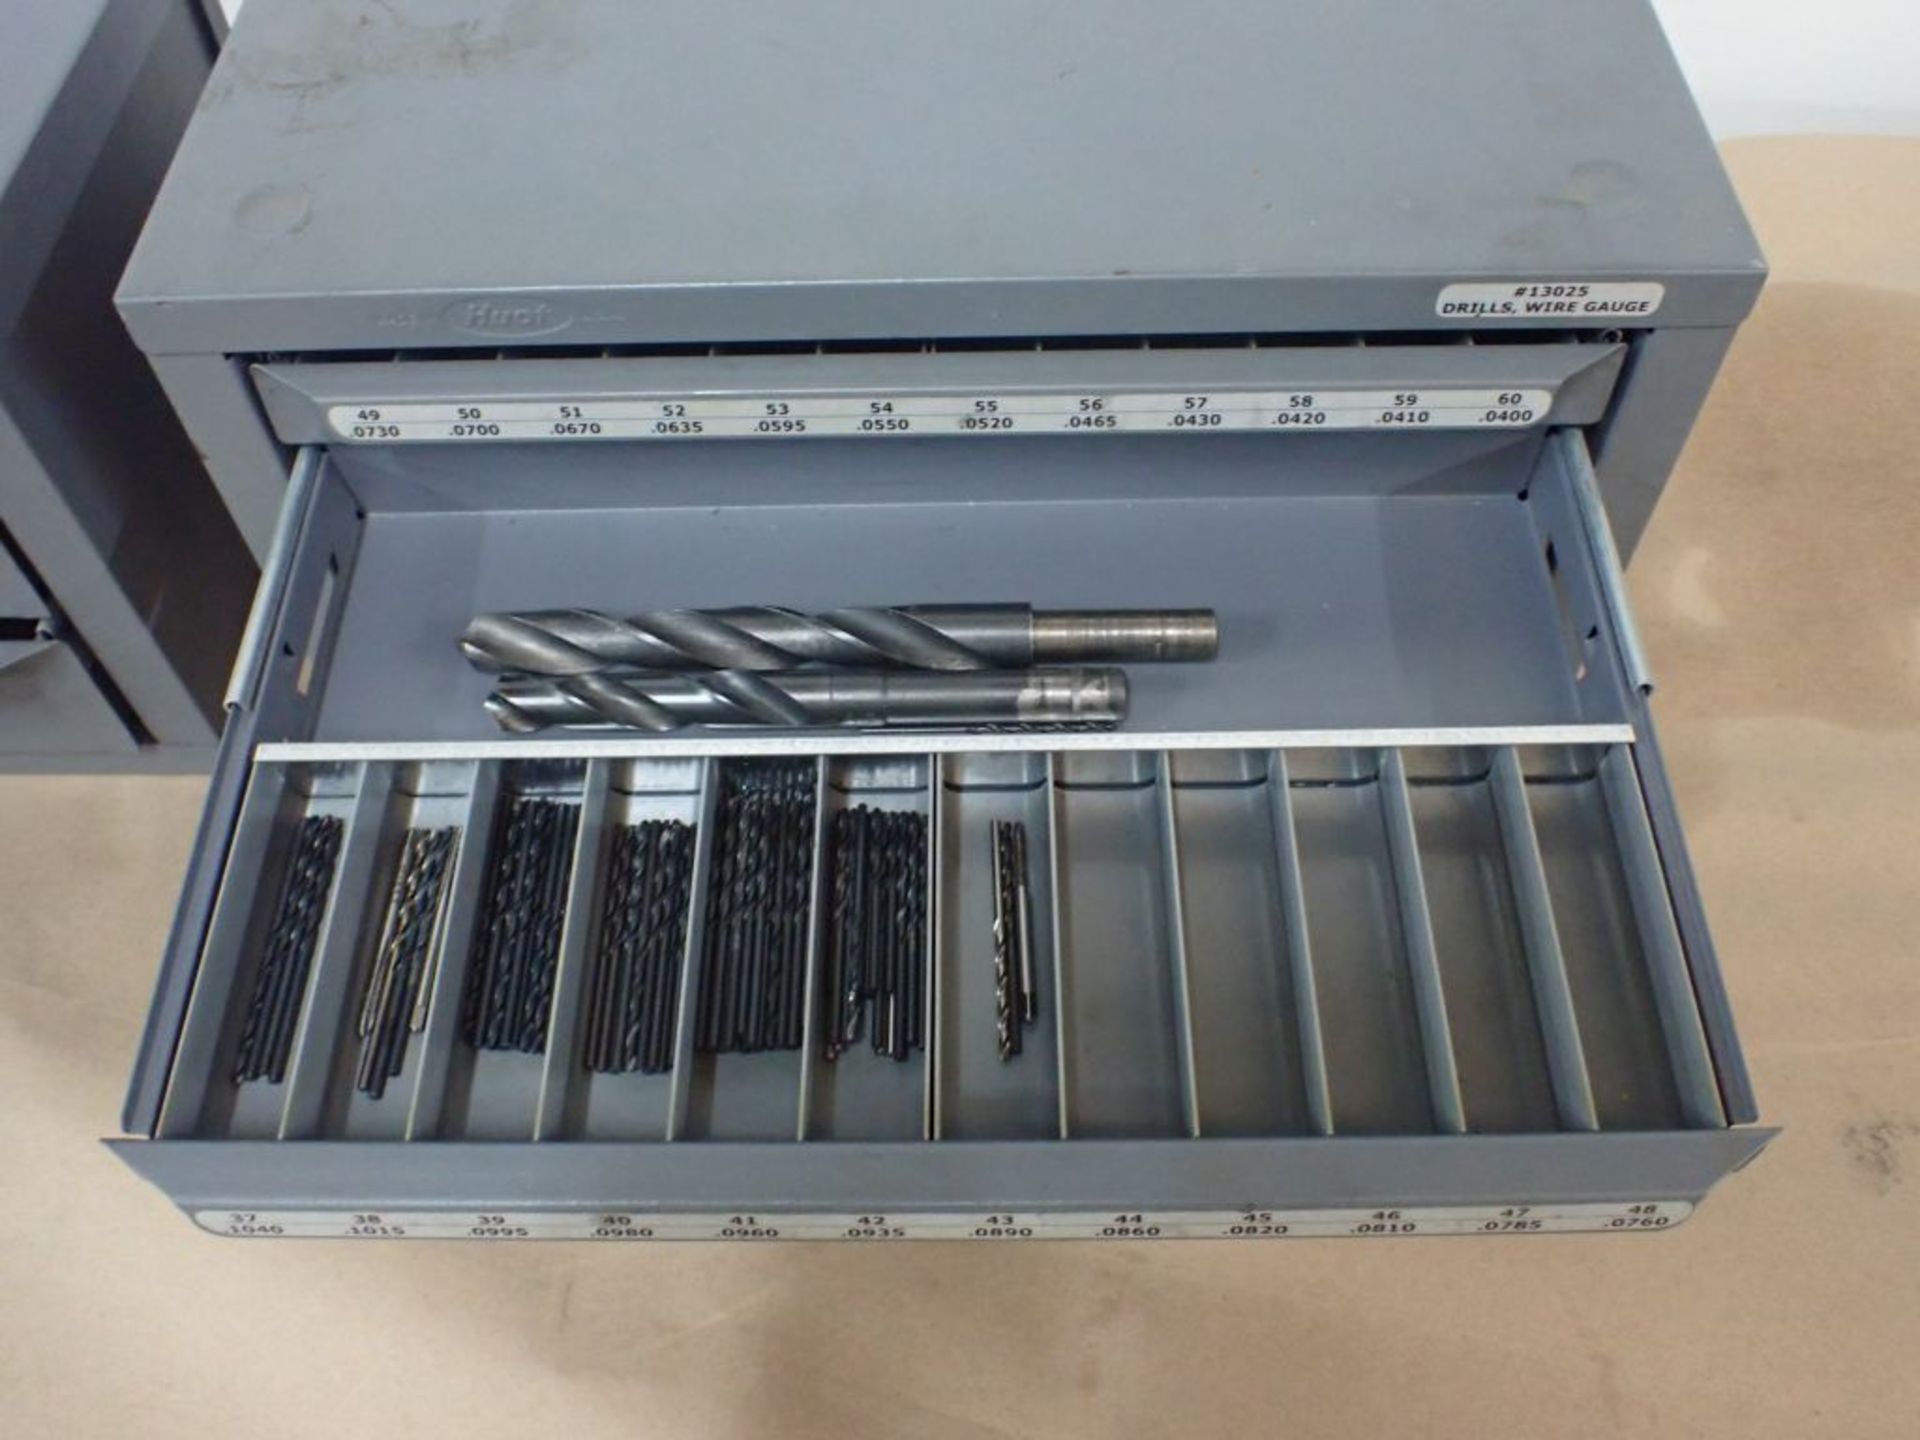 Lot of (3) Huot Metal Tool Small Cabinets - 14-1/2"W x 7-1/2"L x 8-1/2"H; Tag: 219464 - Image 16 of 23